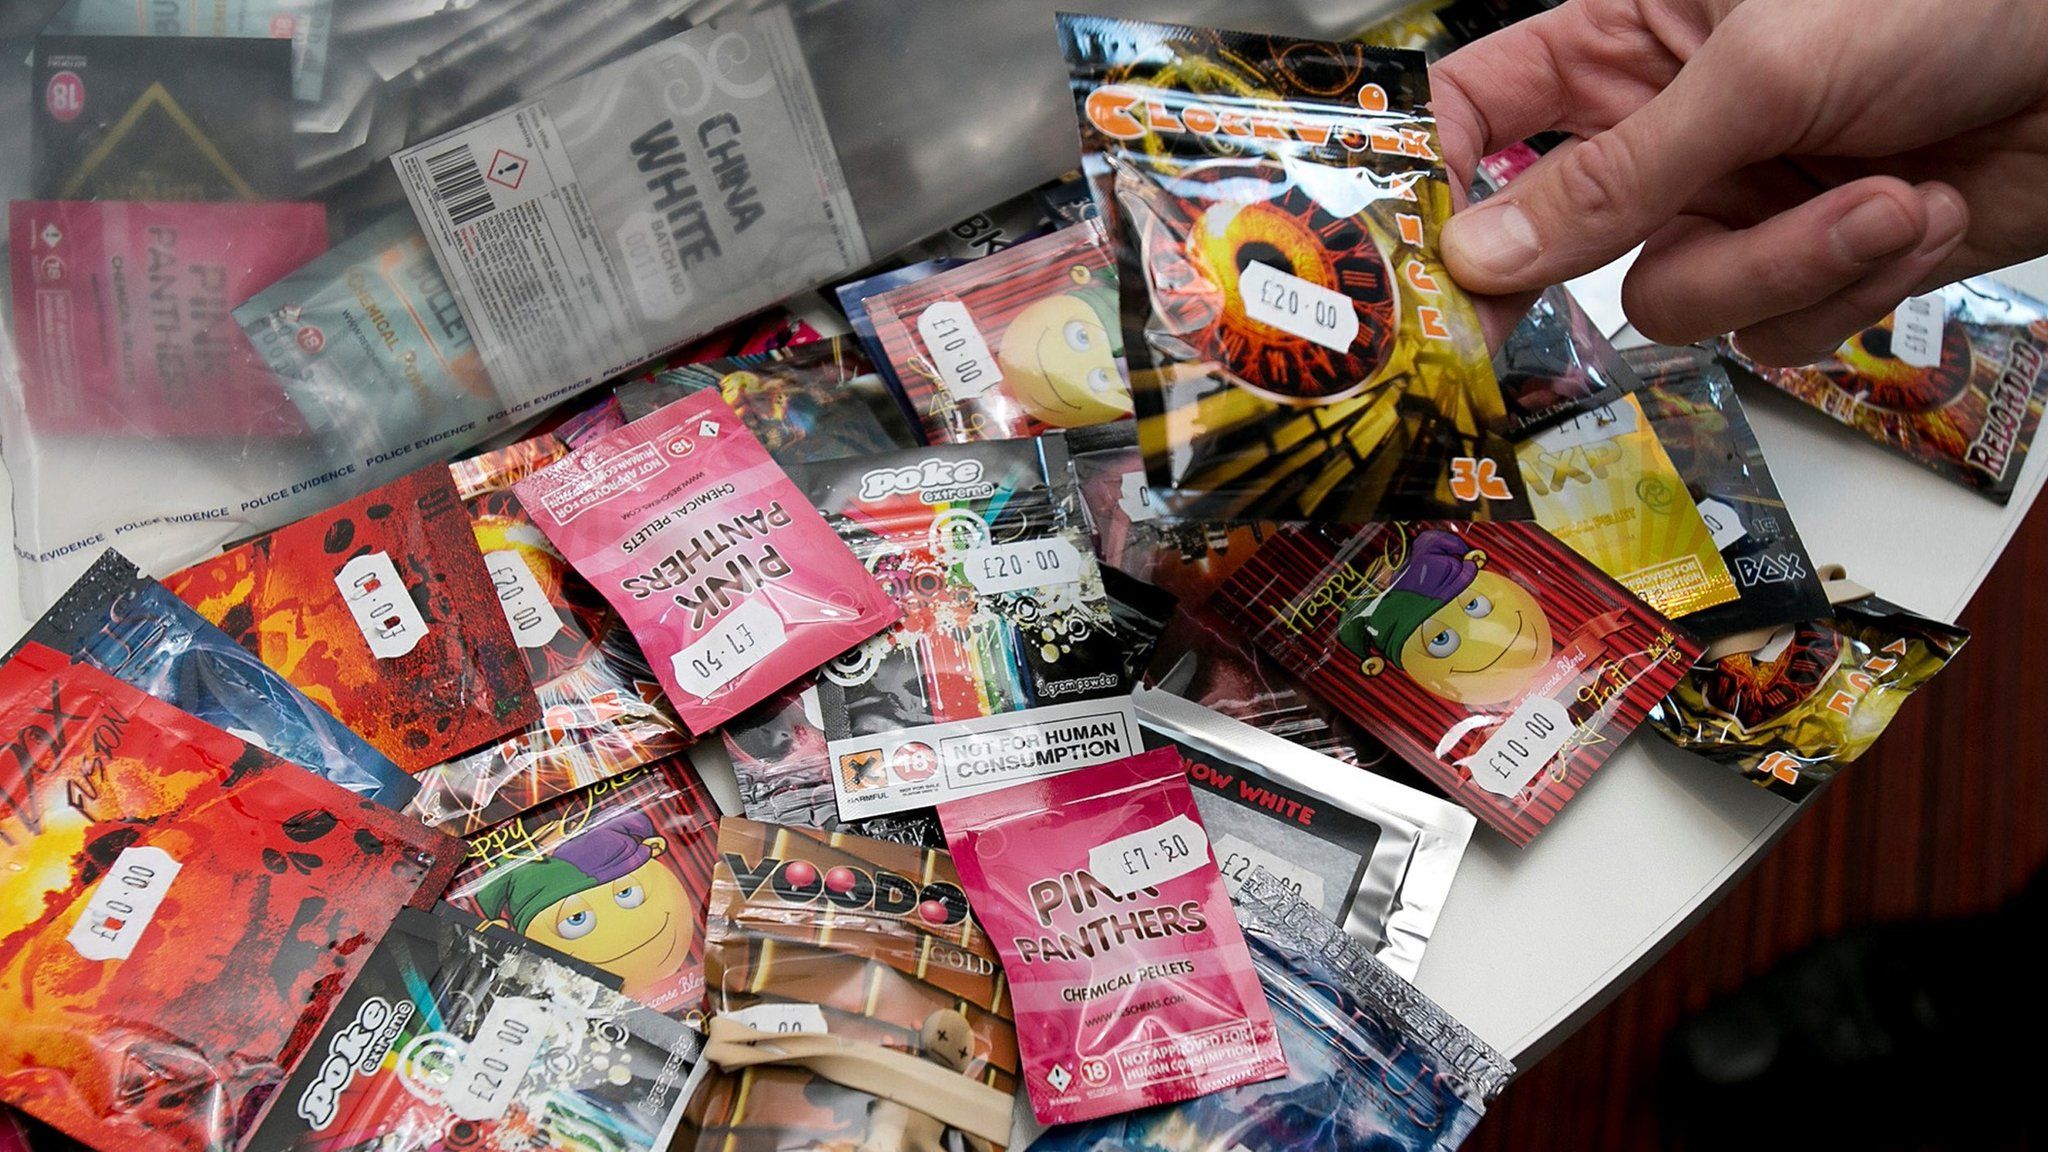 Lots of packets of so-called legal highs